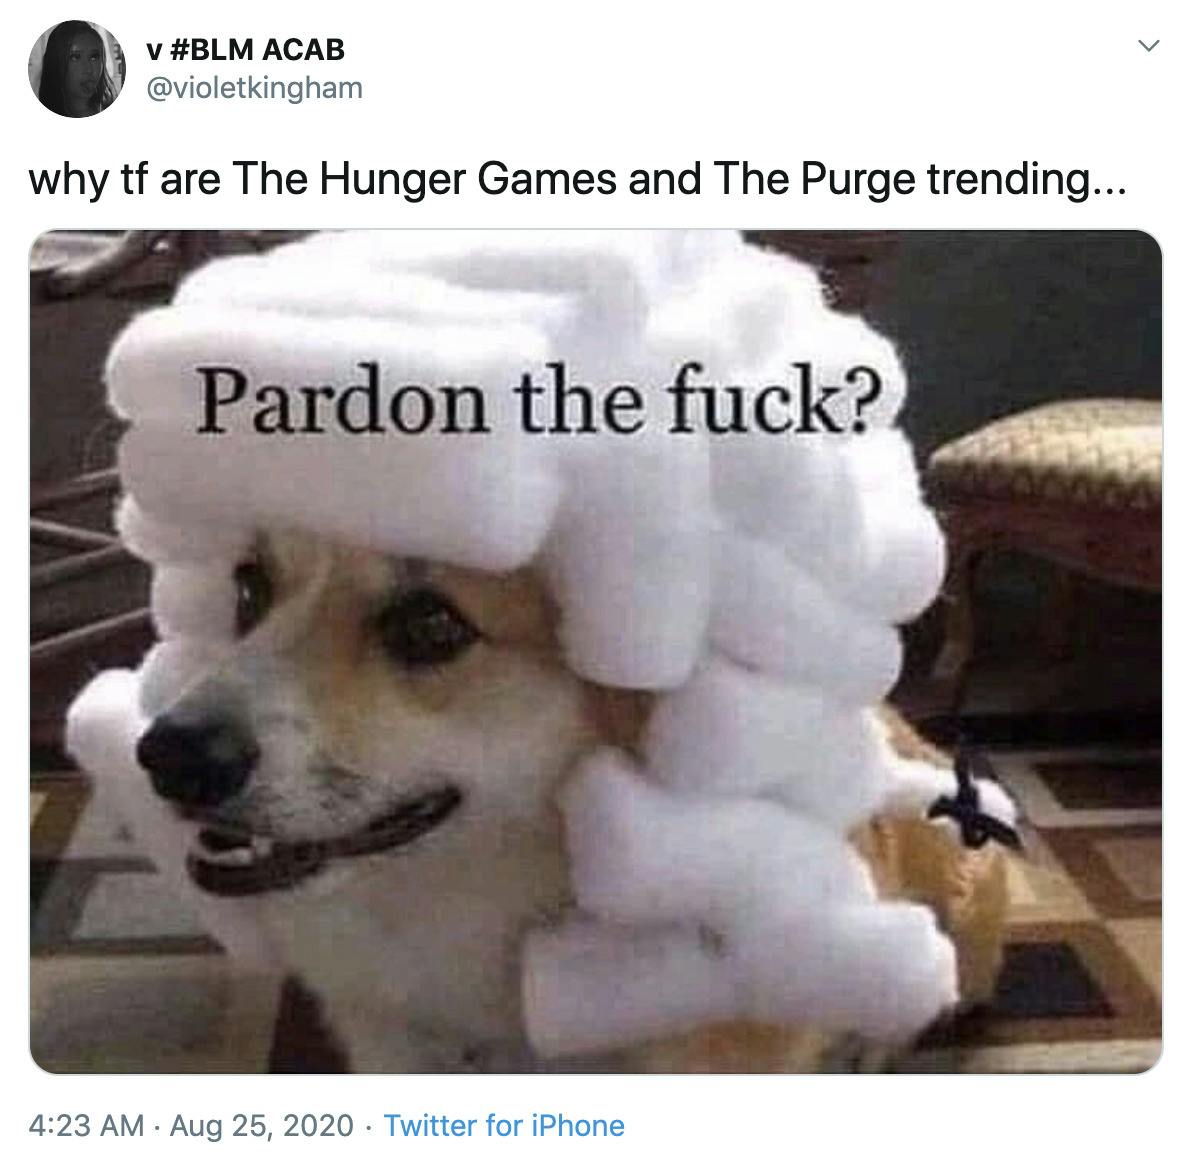 "why tf are The Hunger Games and The Purge trending..." little dog in a barristers wig saying "Pardon the Fuck?